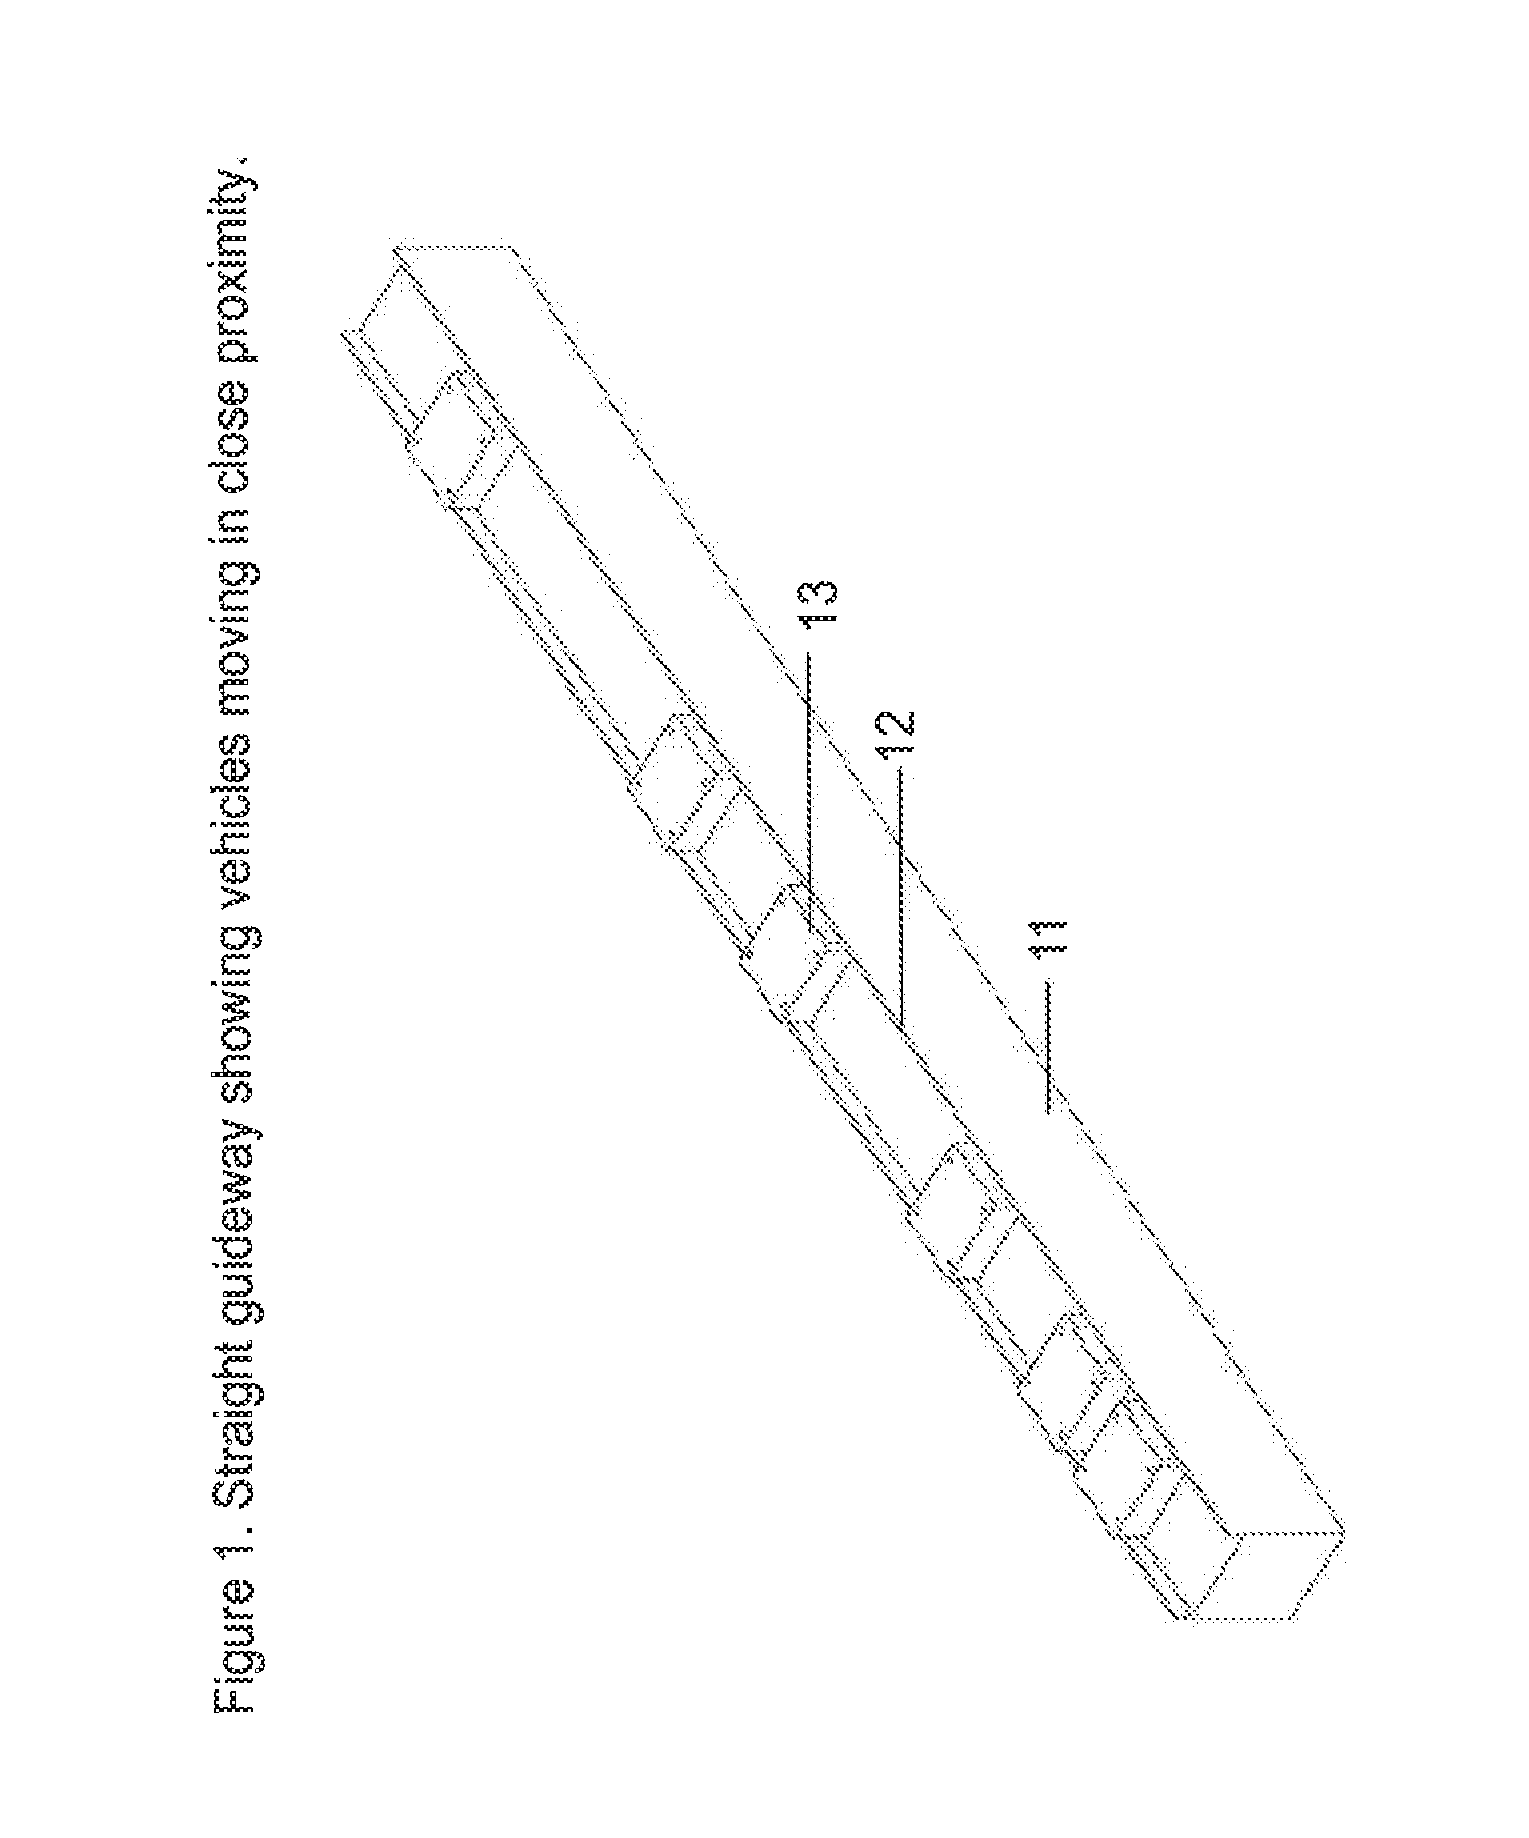 Transport system powered by short block linear synchronous motors and switching mechanism